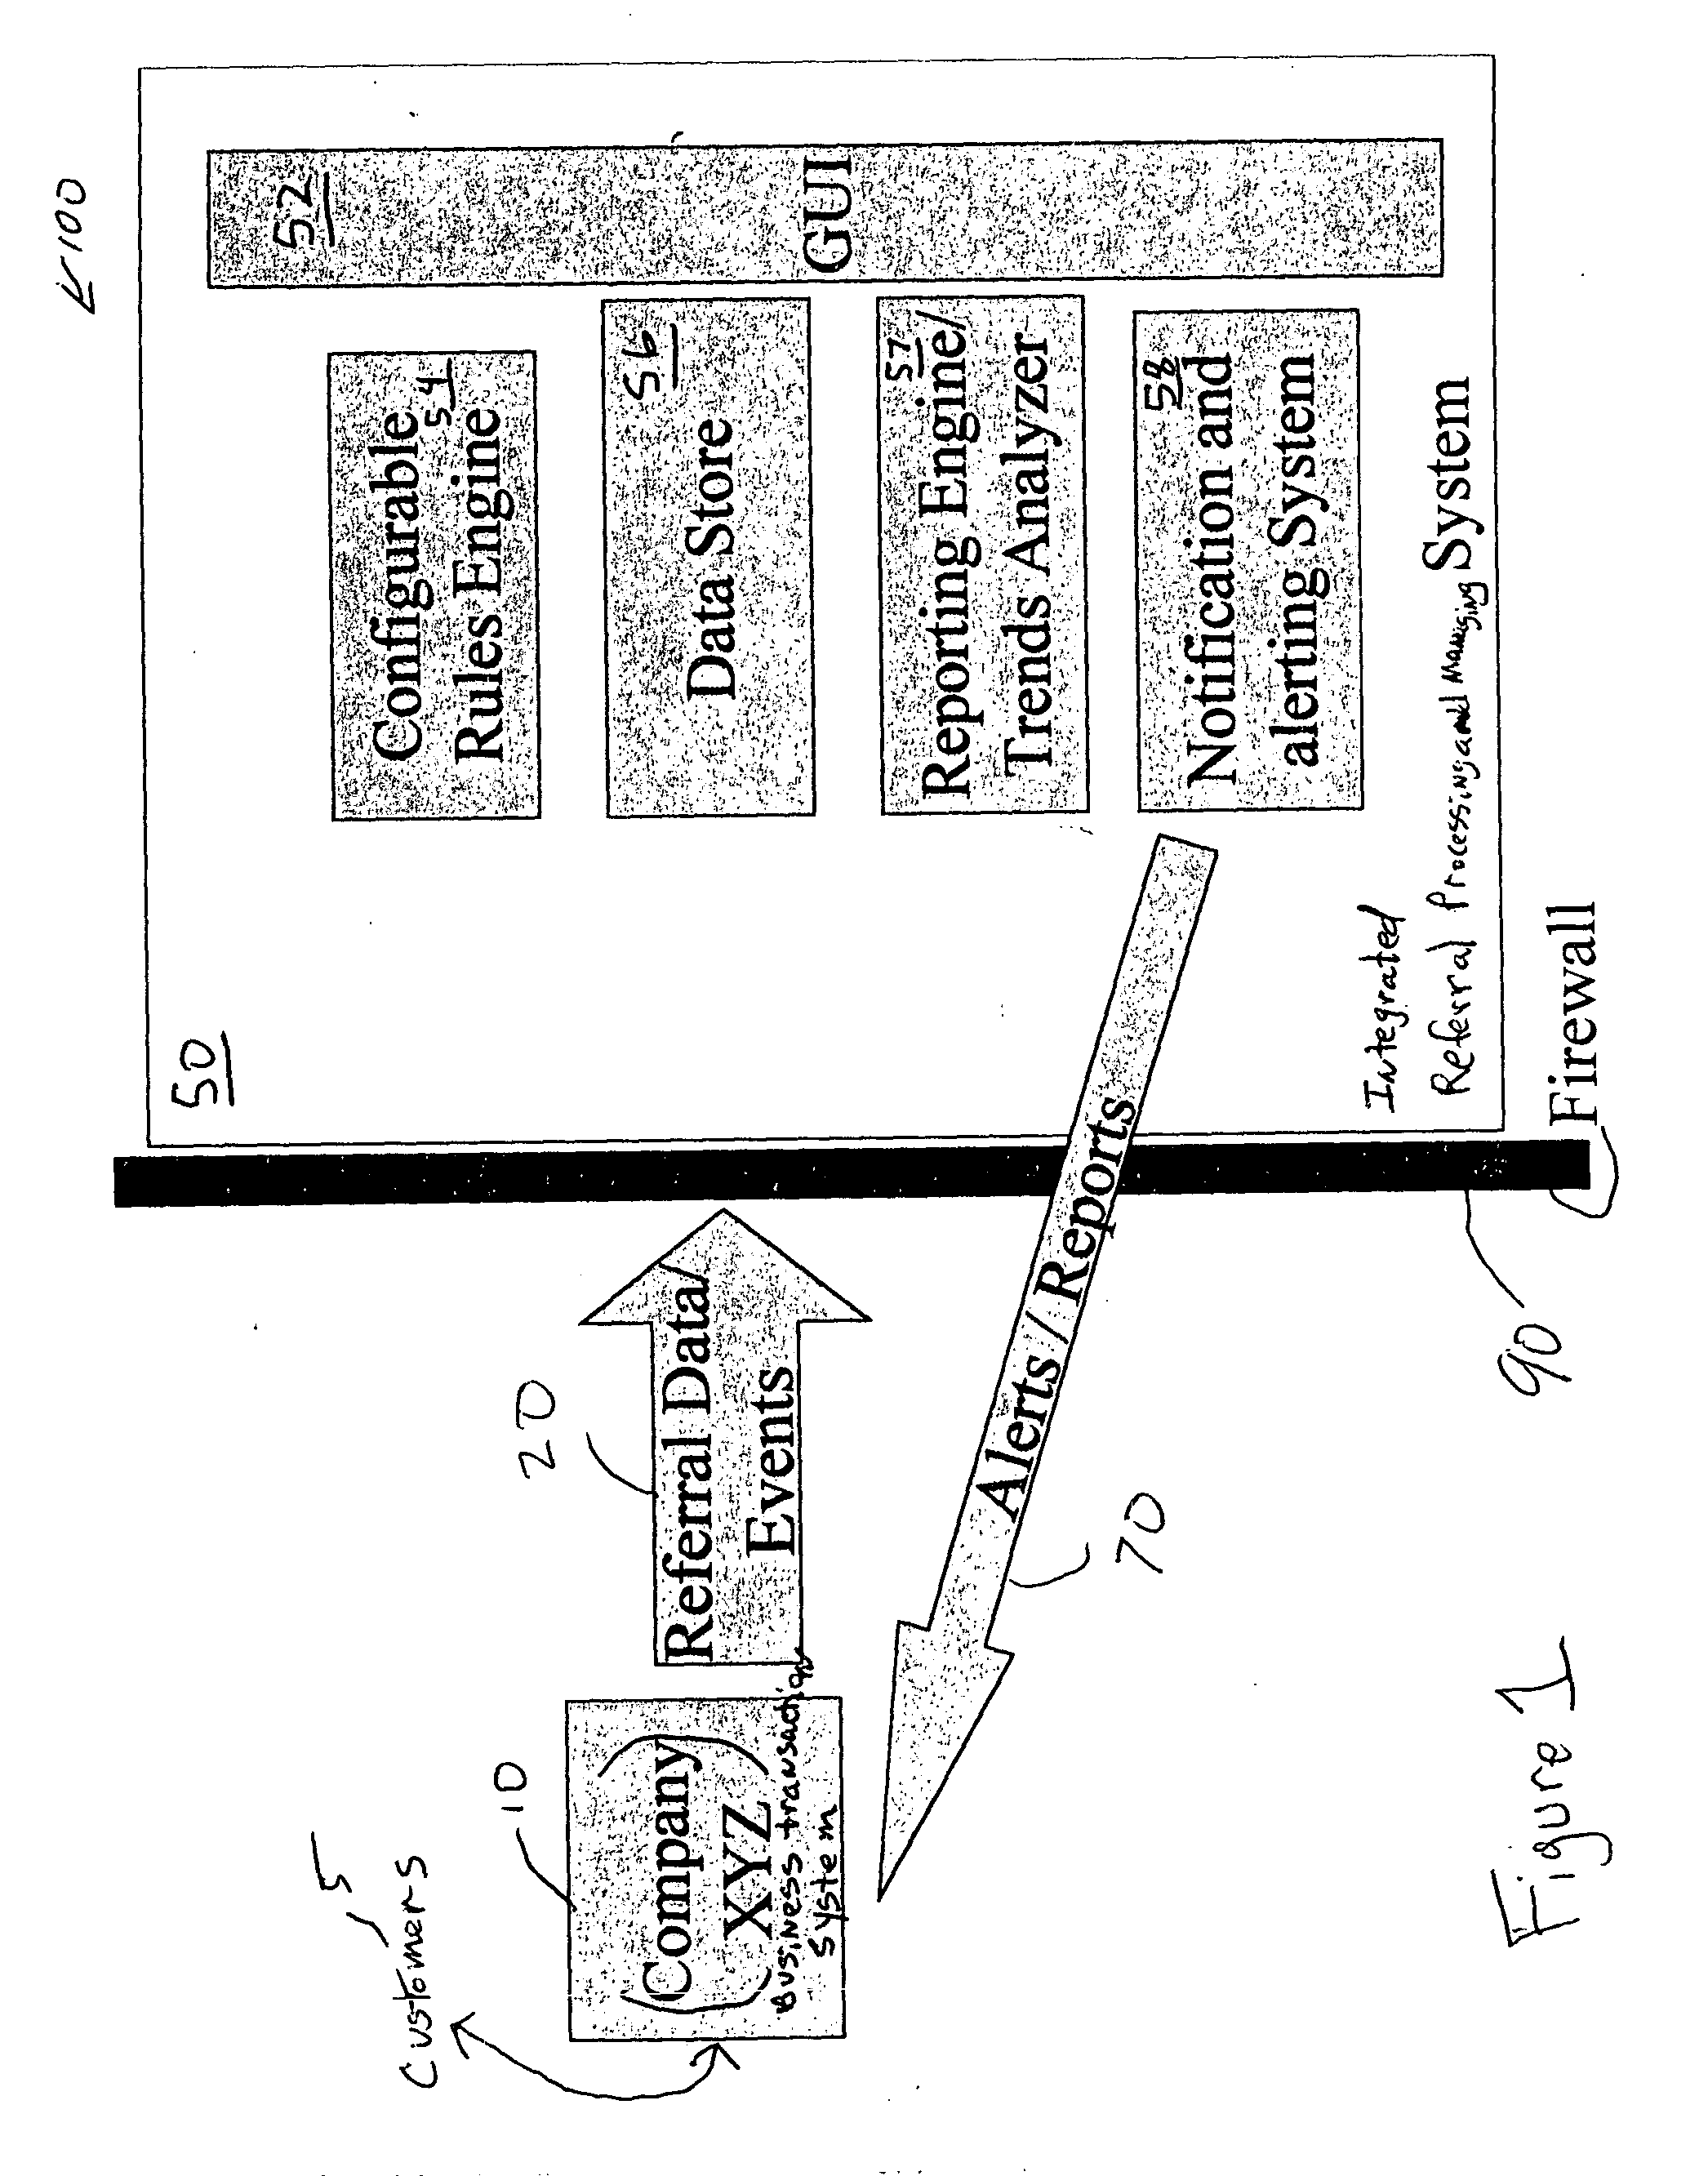 Method and system for processing and managing referral data